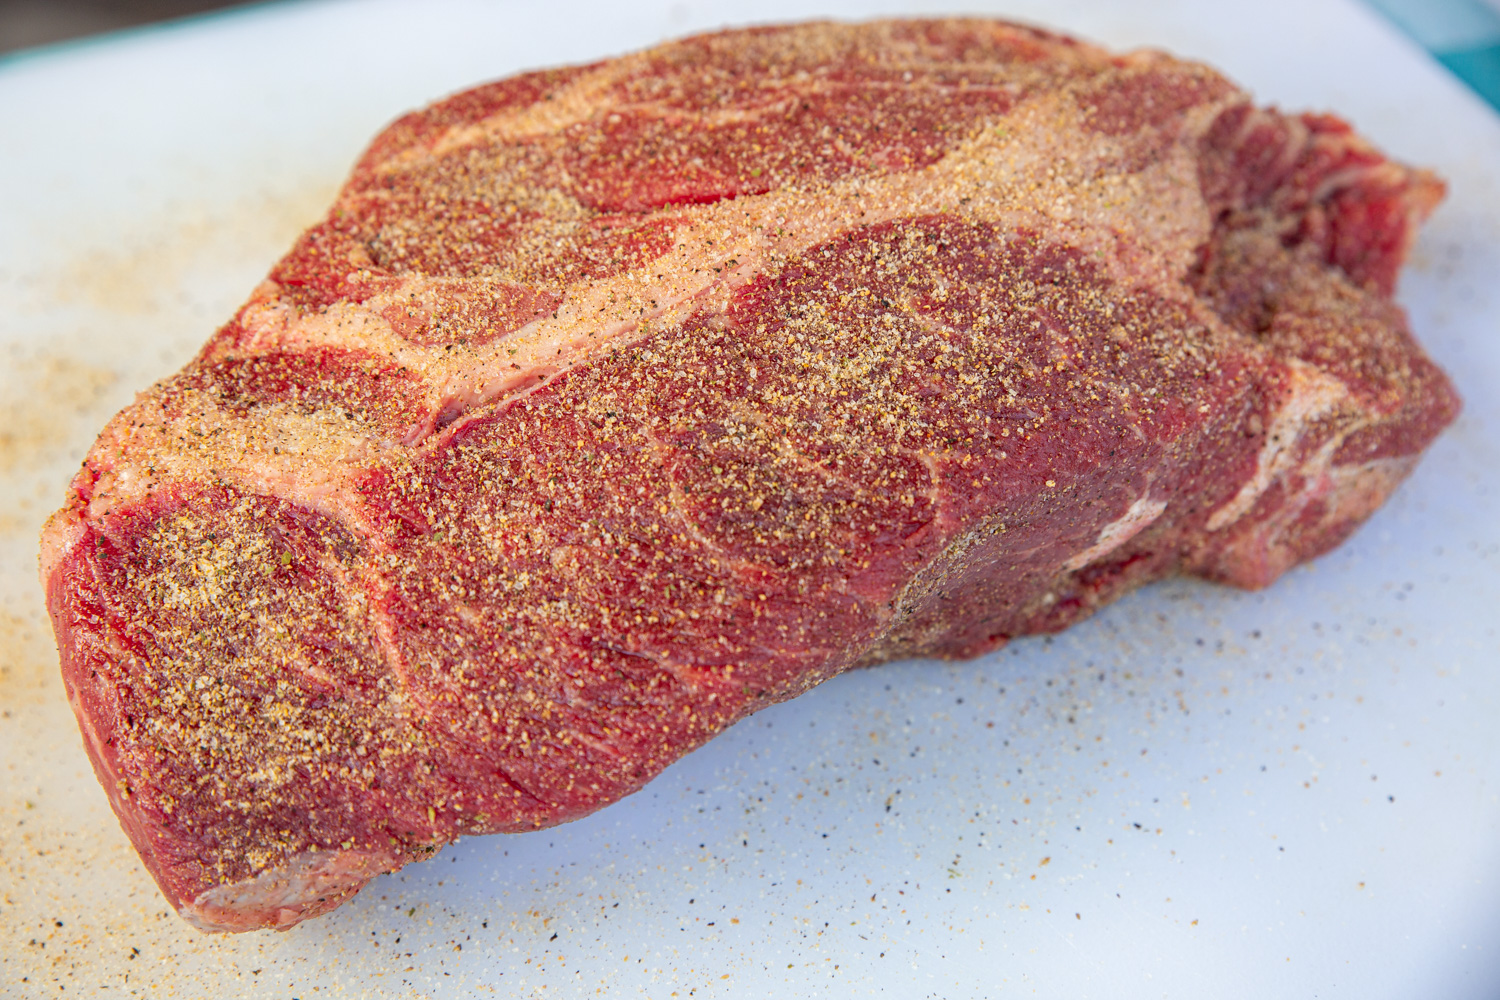 The beef chuck roast, sprinkled liberally (but not fully coated) with beef rub. Red meat is still able to be seen.